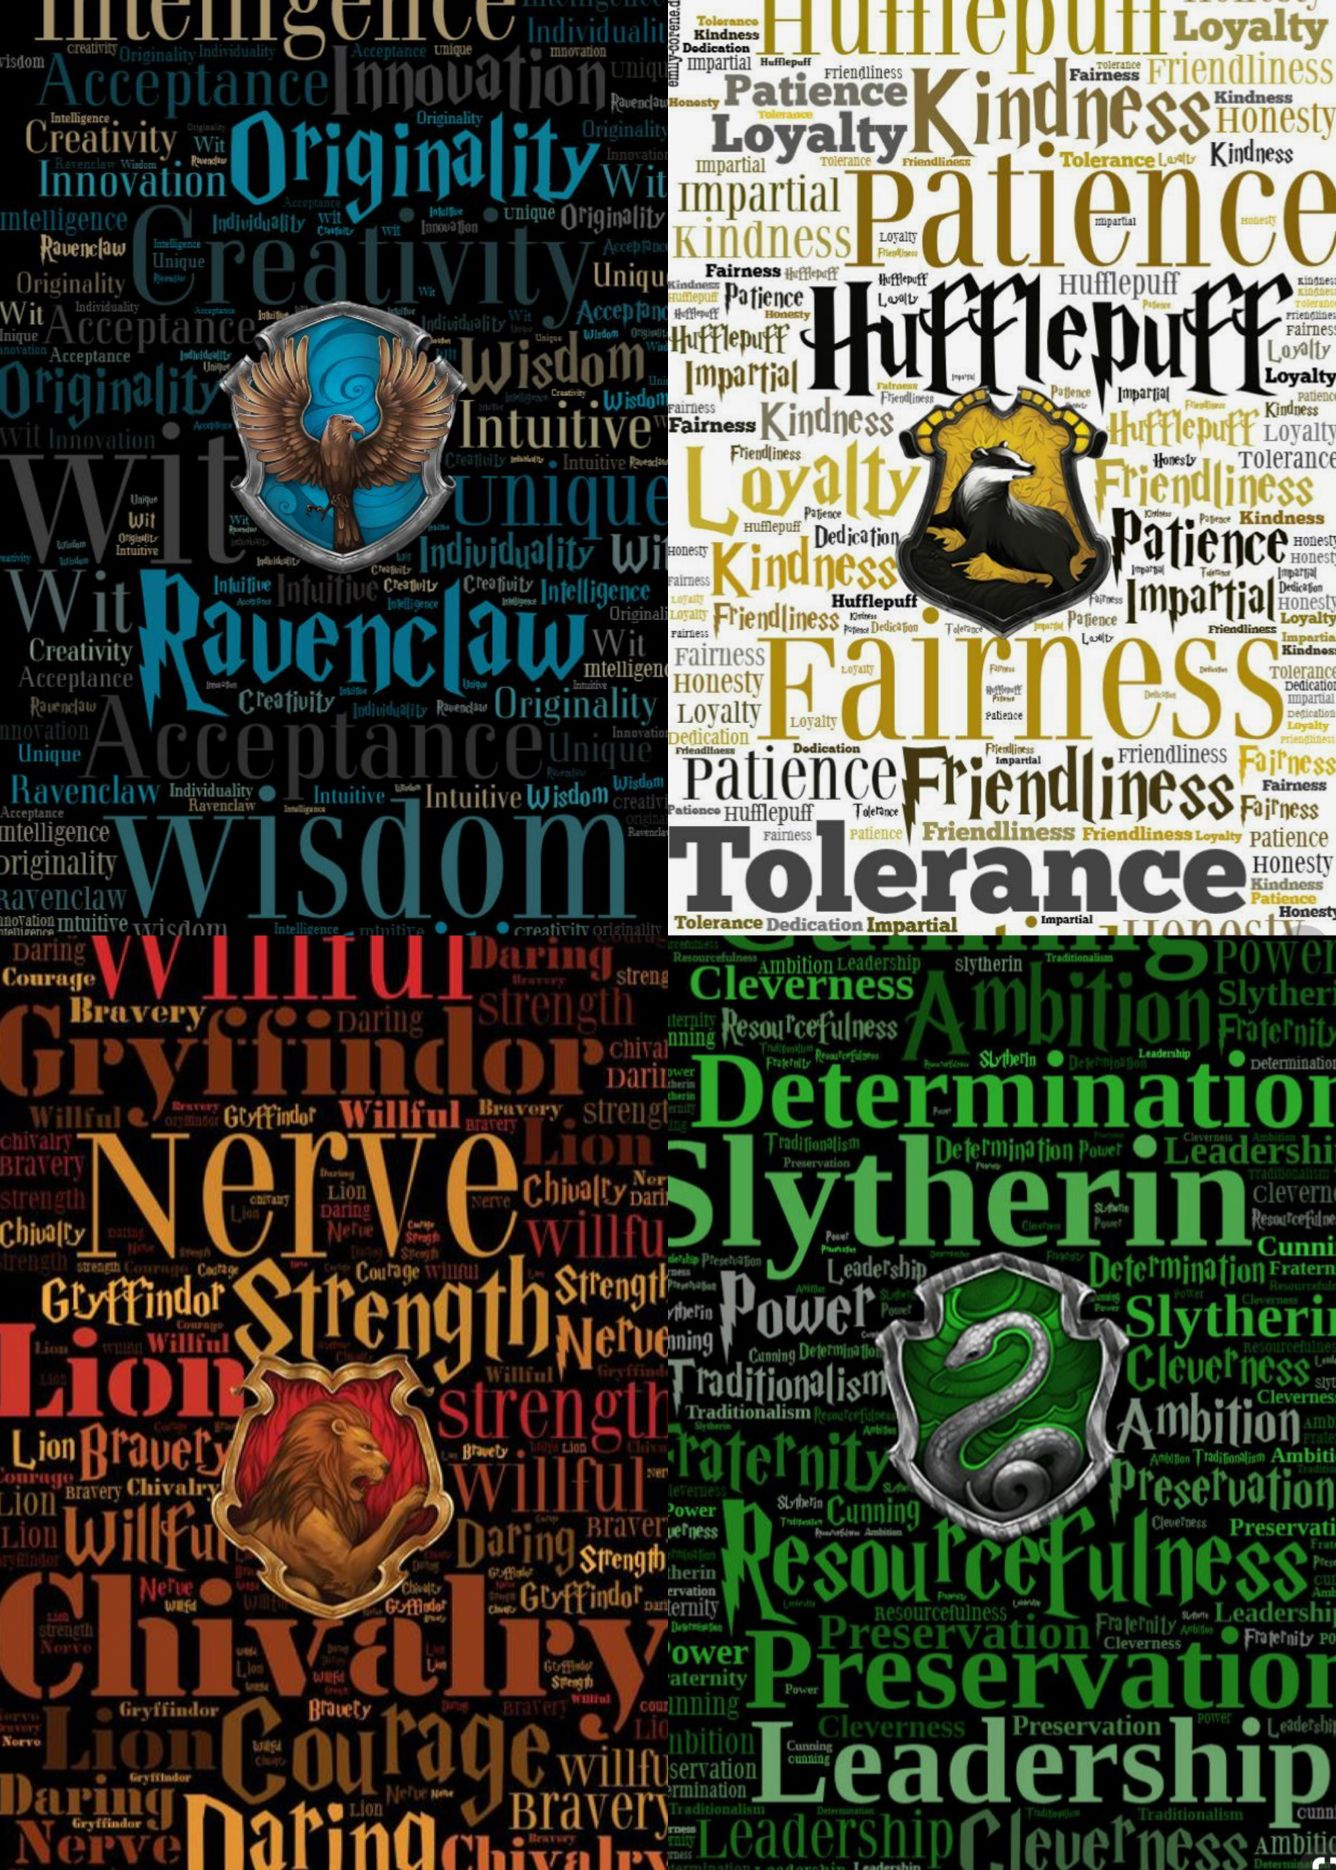 Harry Potter Houses Background